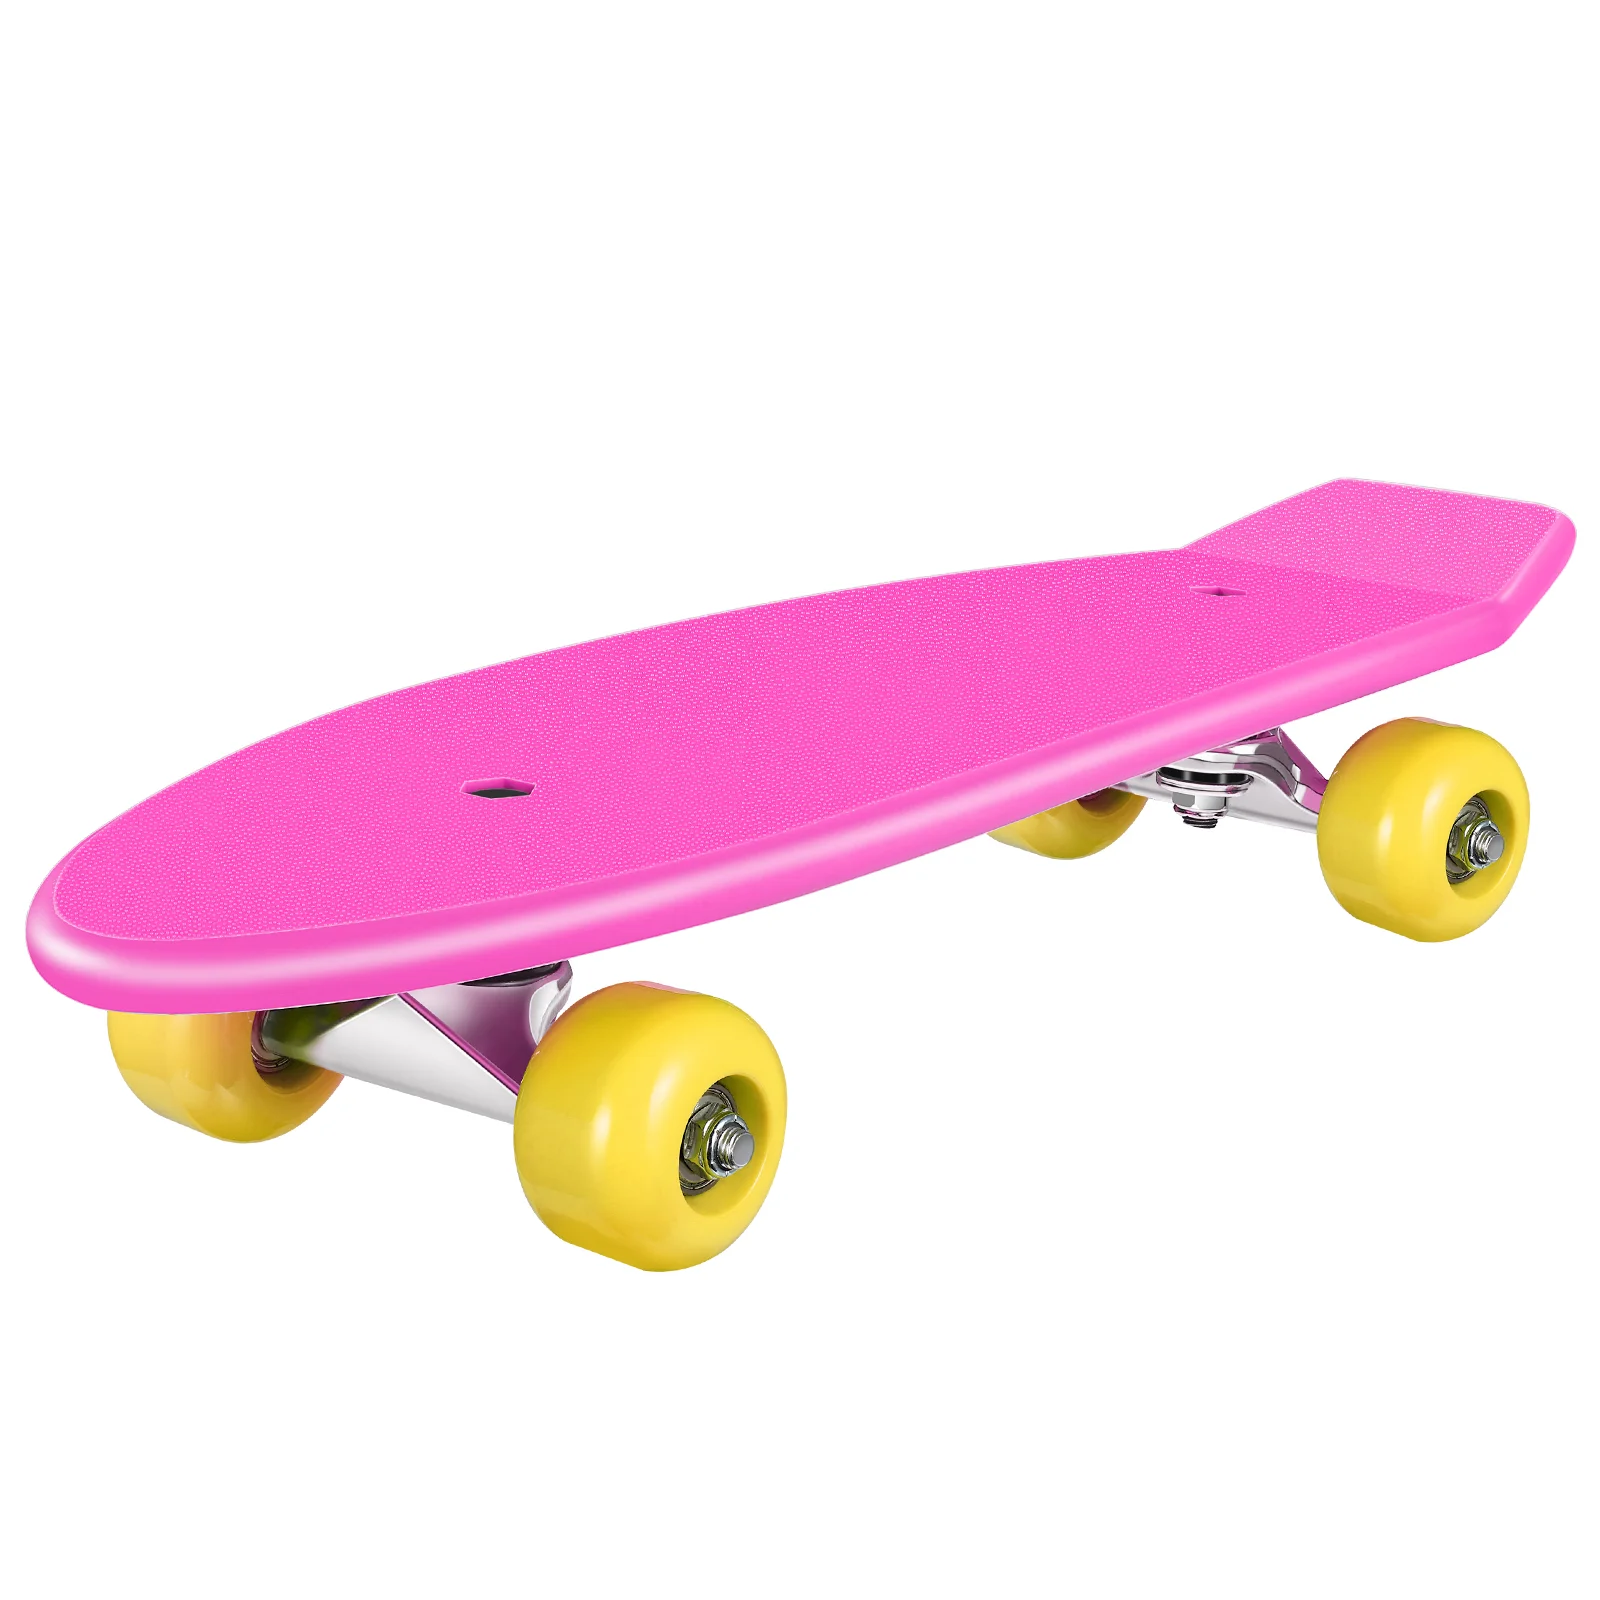 MOVTOTOP Durable Bright Color 4 Wheels Play Longboard for Kids Boys Girls